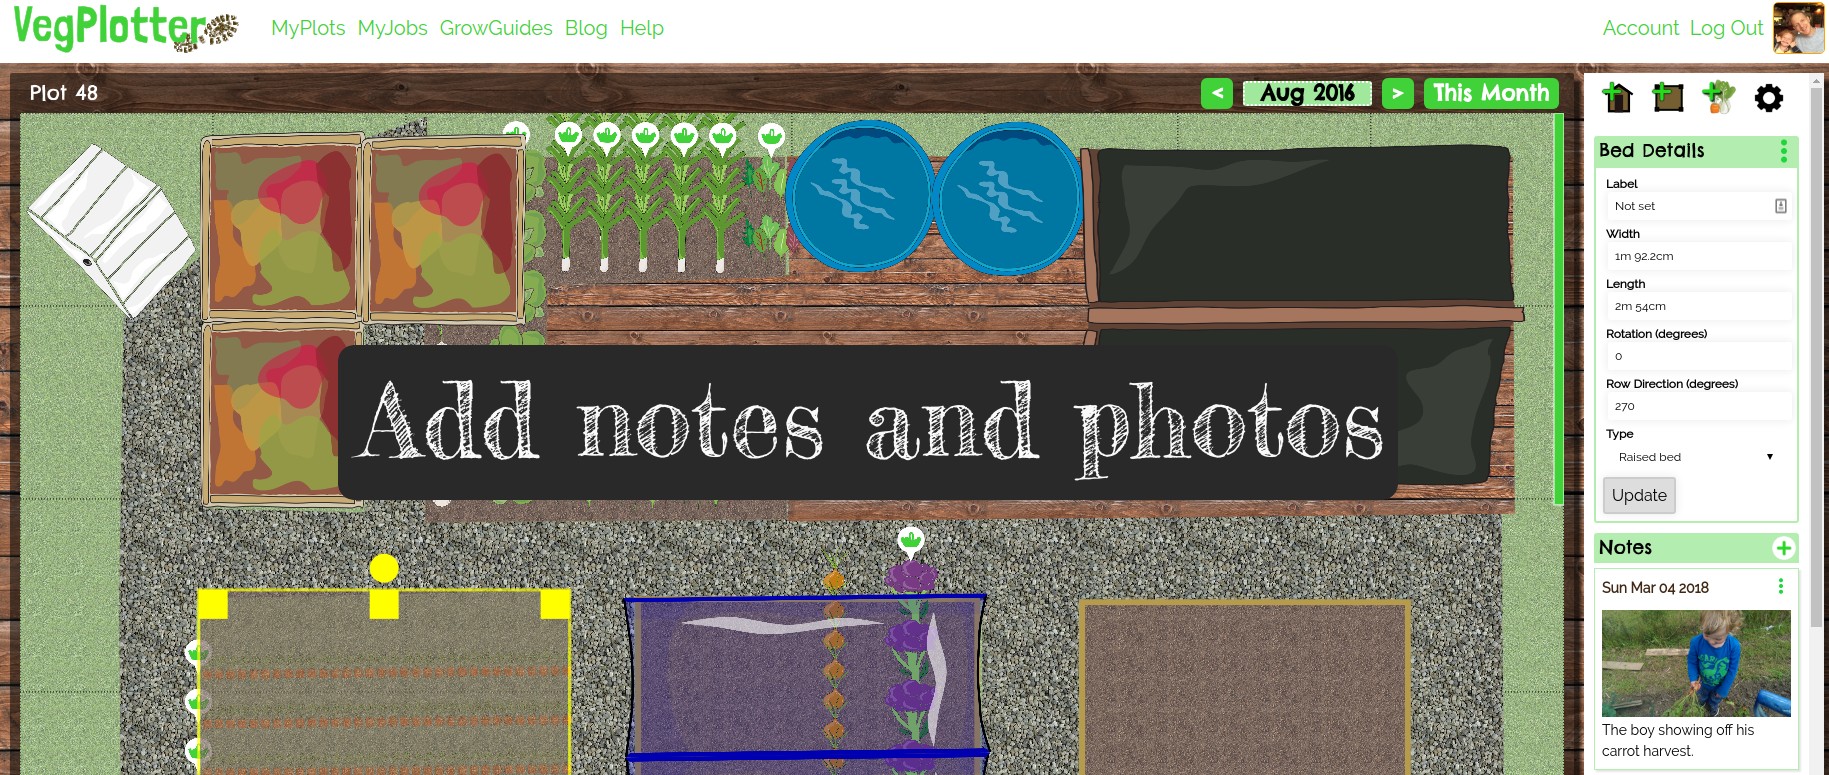 We're added some new features to our vegetable garden planner. 